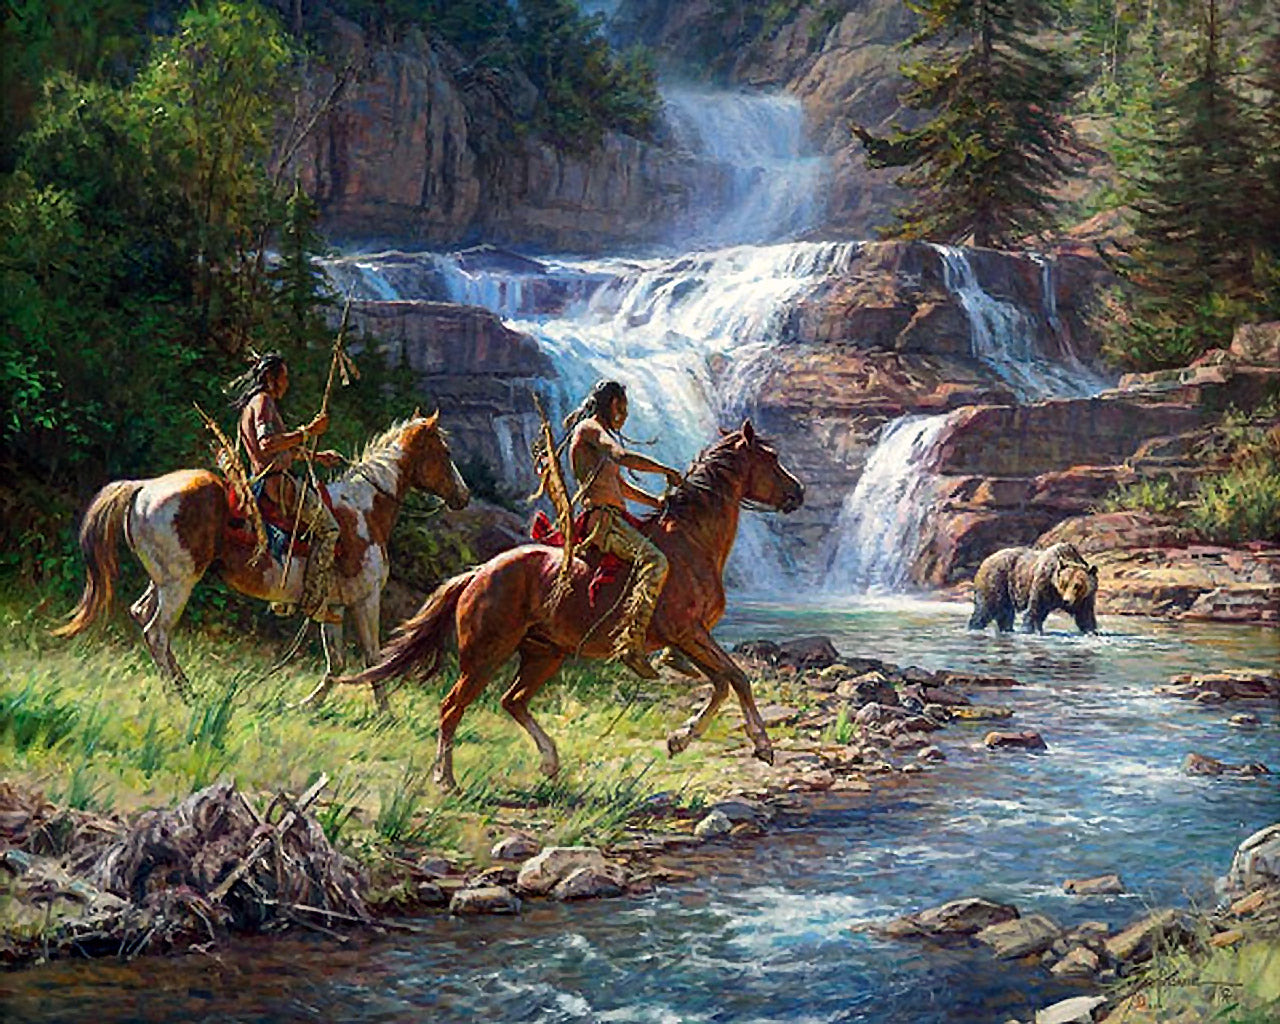 "Encounter by The Falls" Fine Art Reproductions